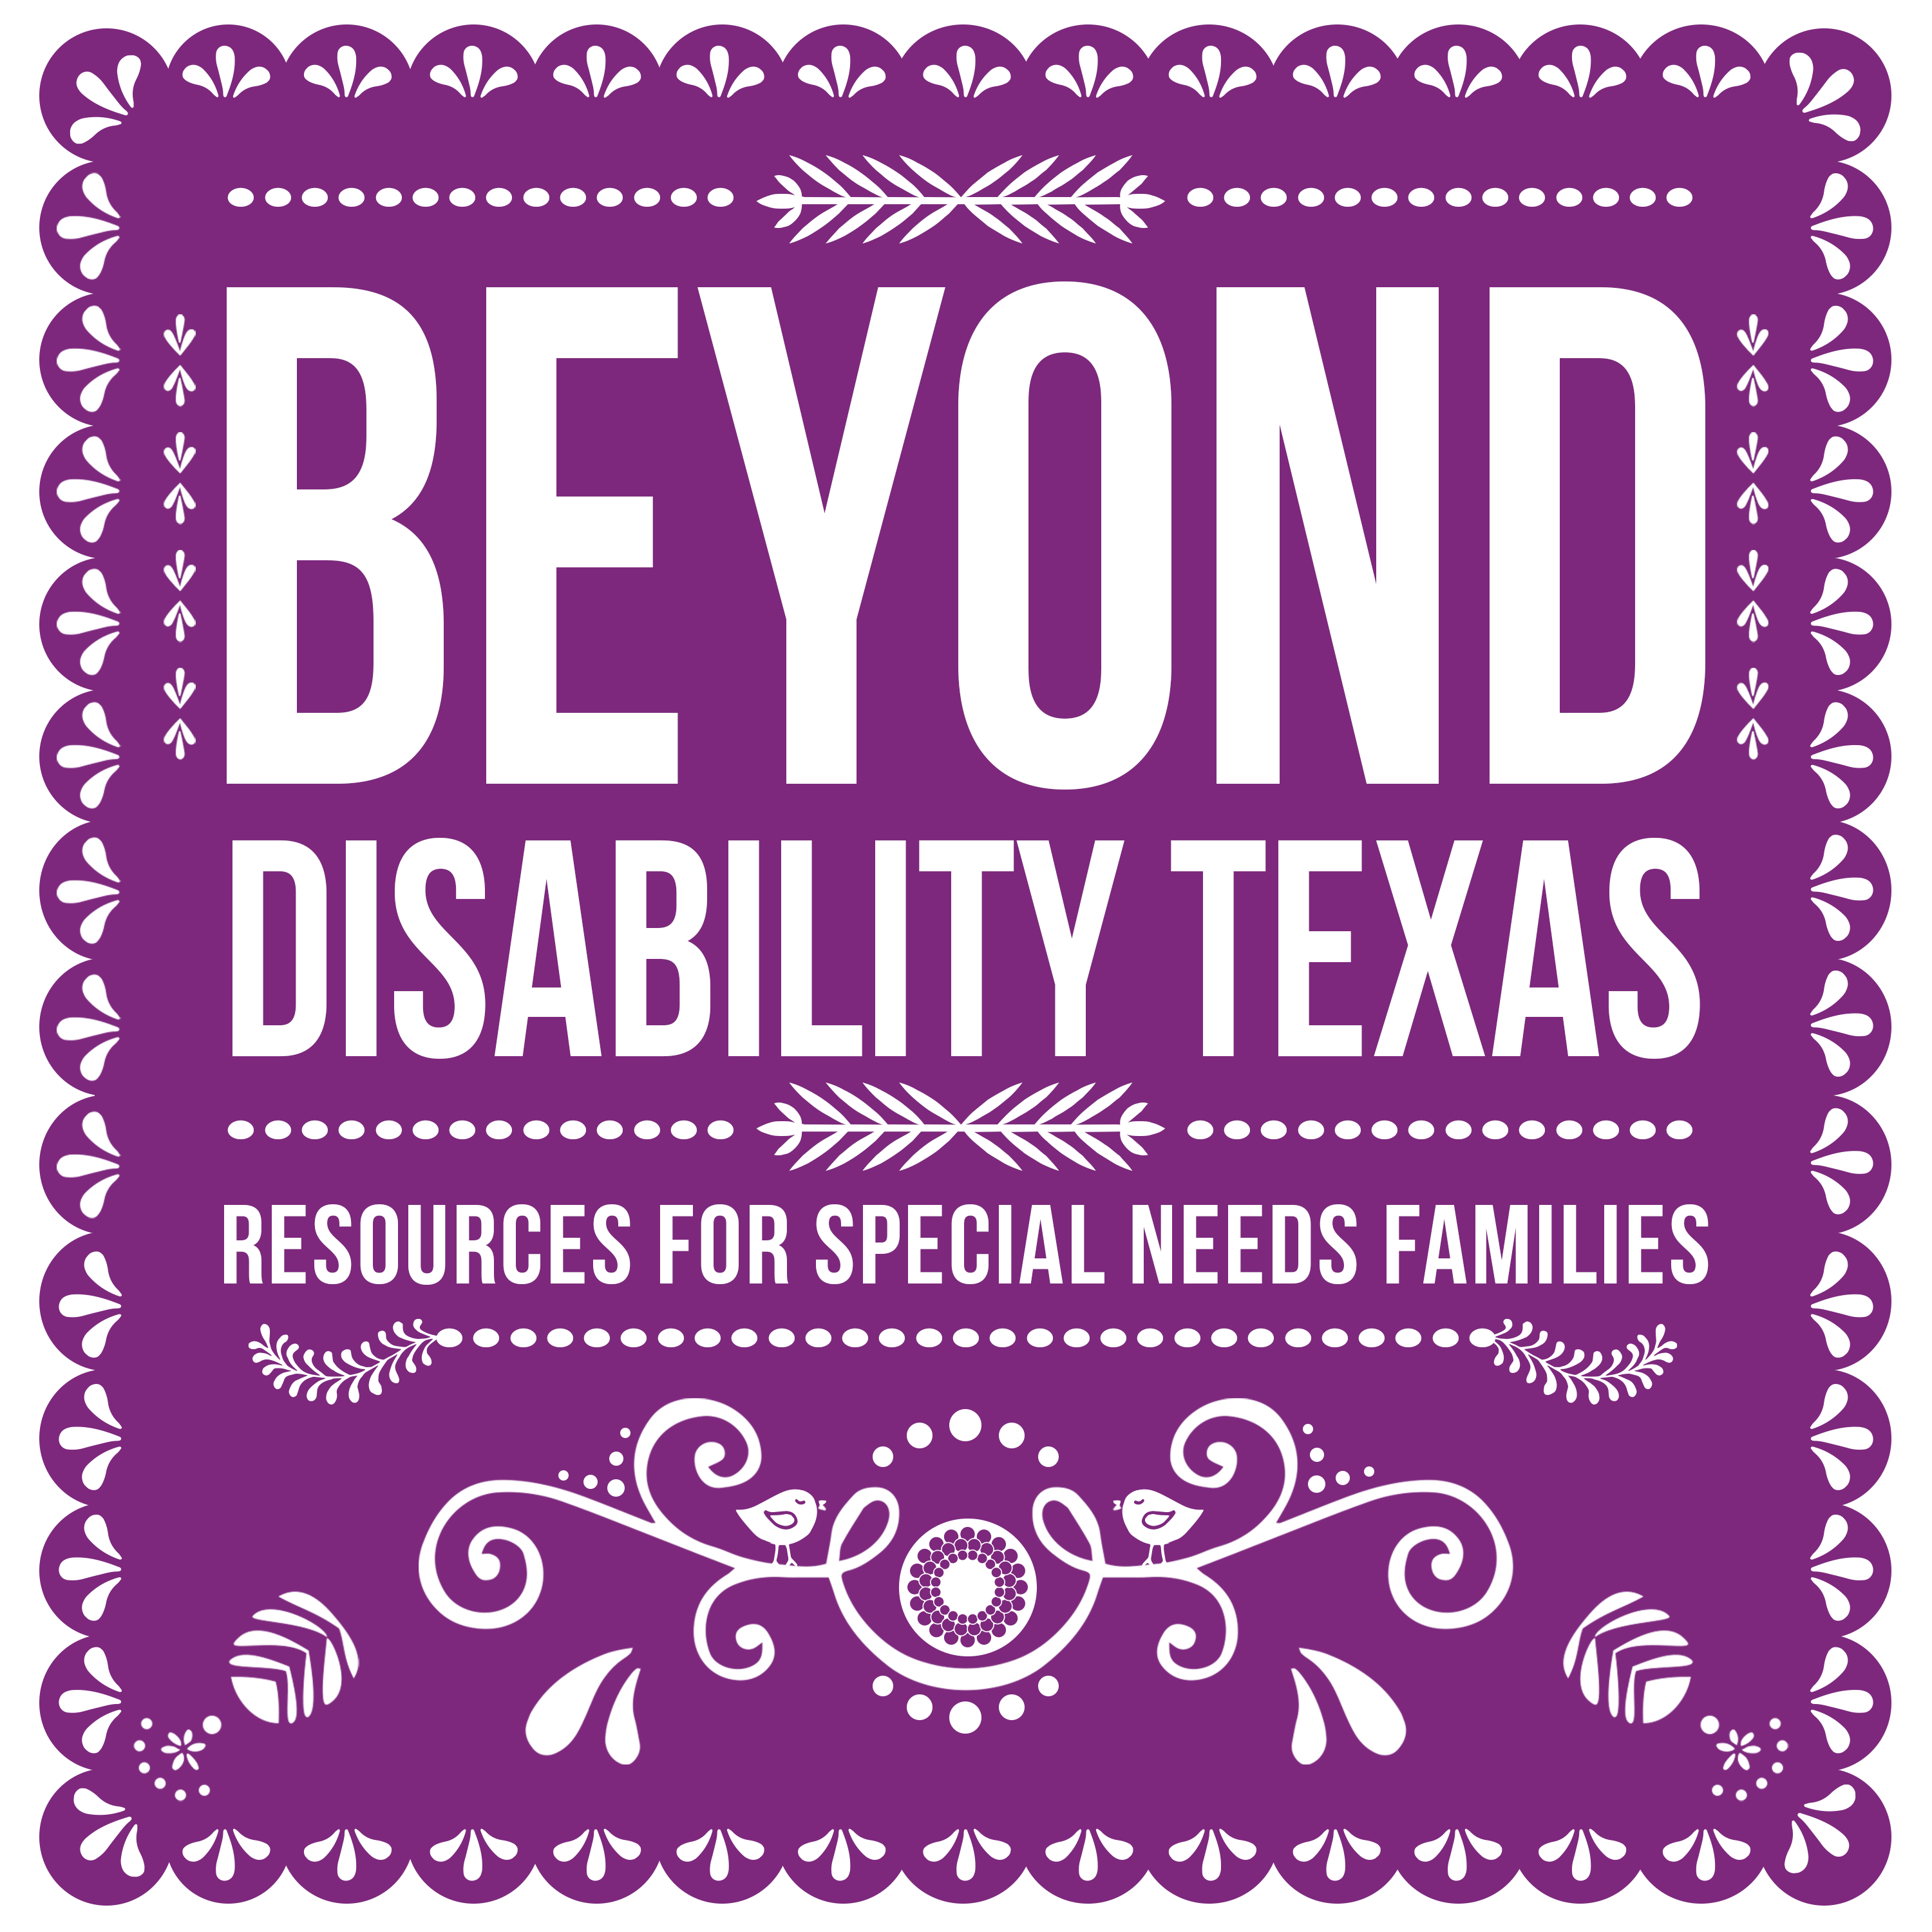 Beyond Disability Texas - Resources for Special Needs Families